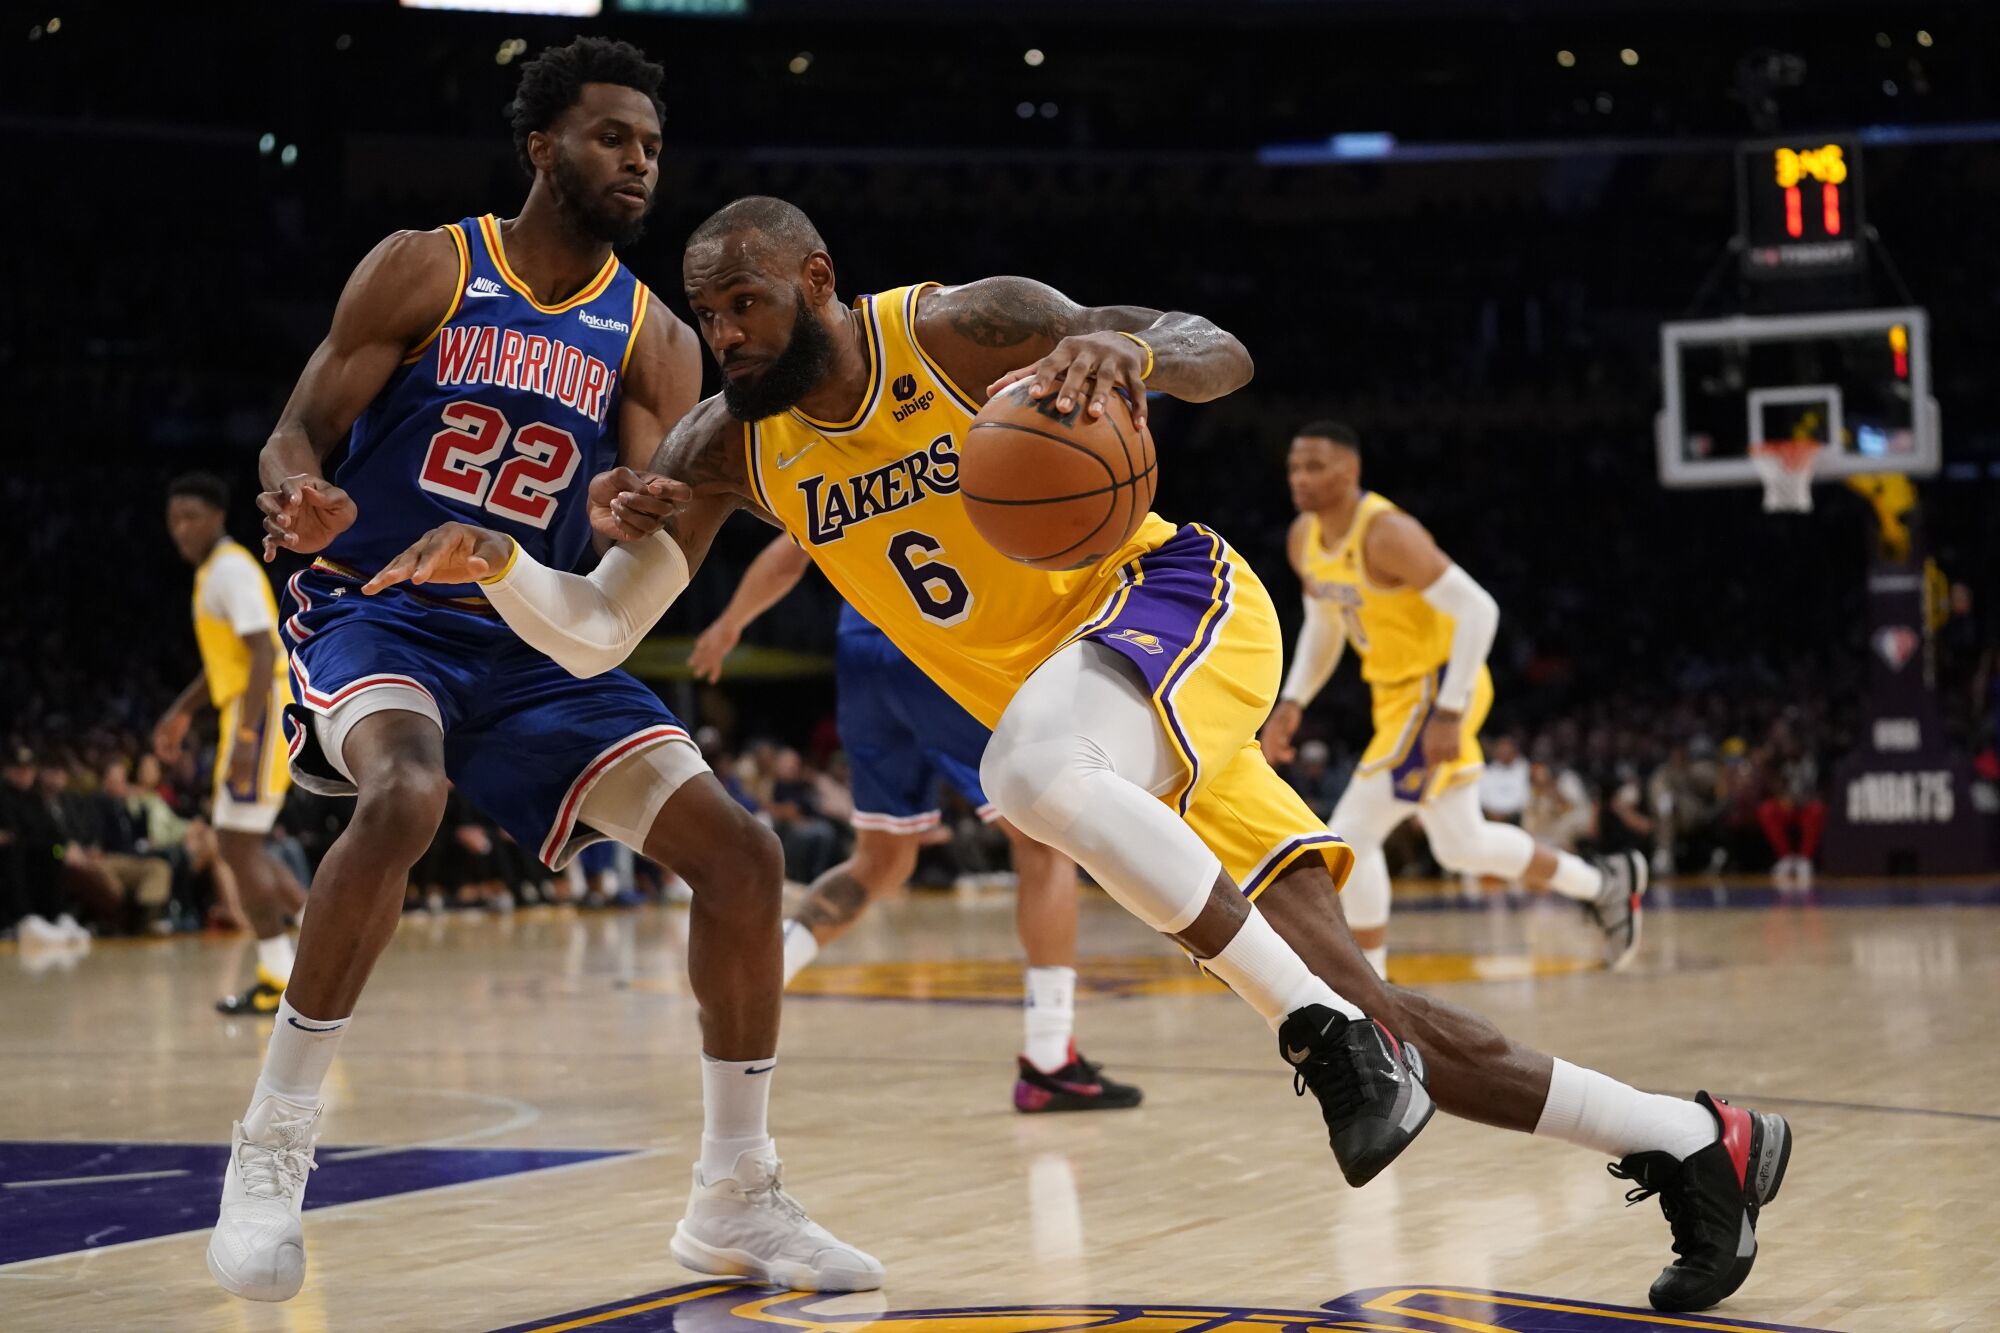 Lakers forward LeBron James drives the baseline against Warriors forward Andrew Wiggins.